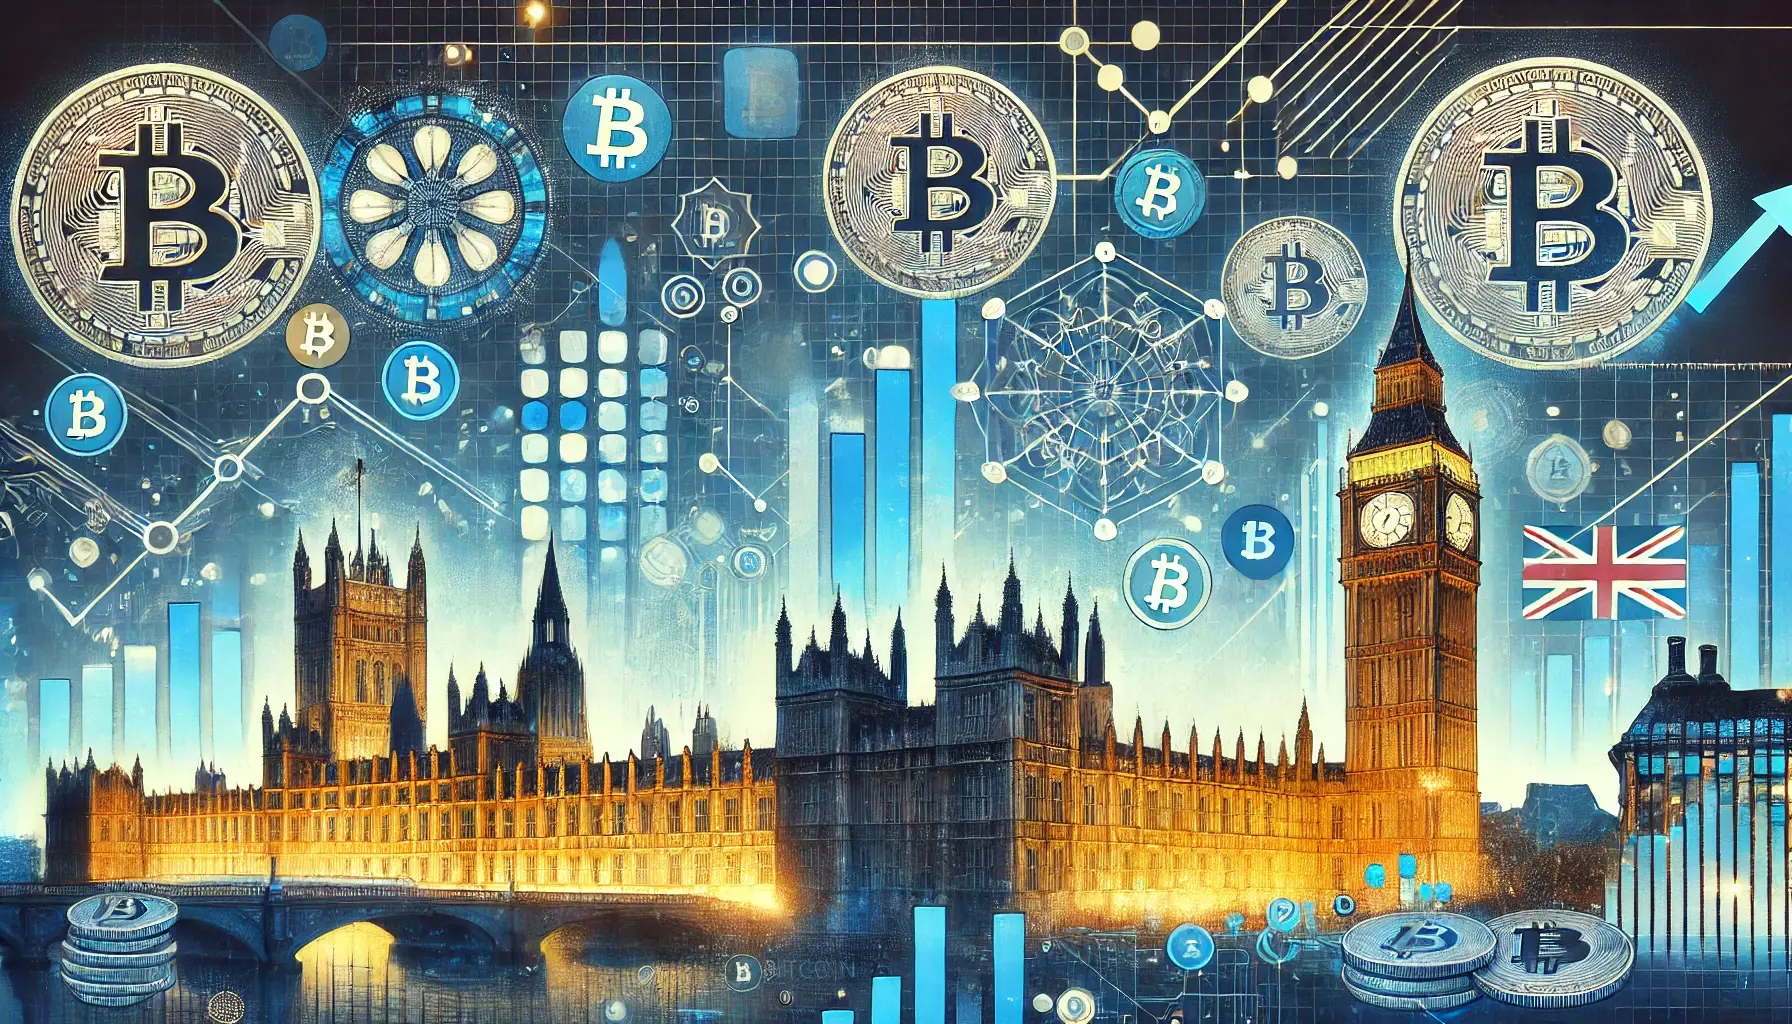 LondonLink's Bitcoin Briefing